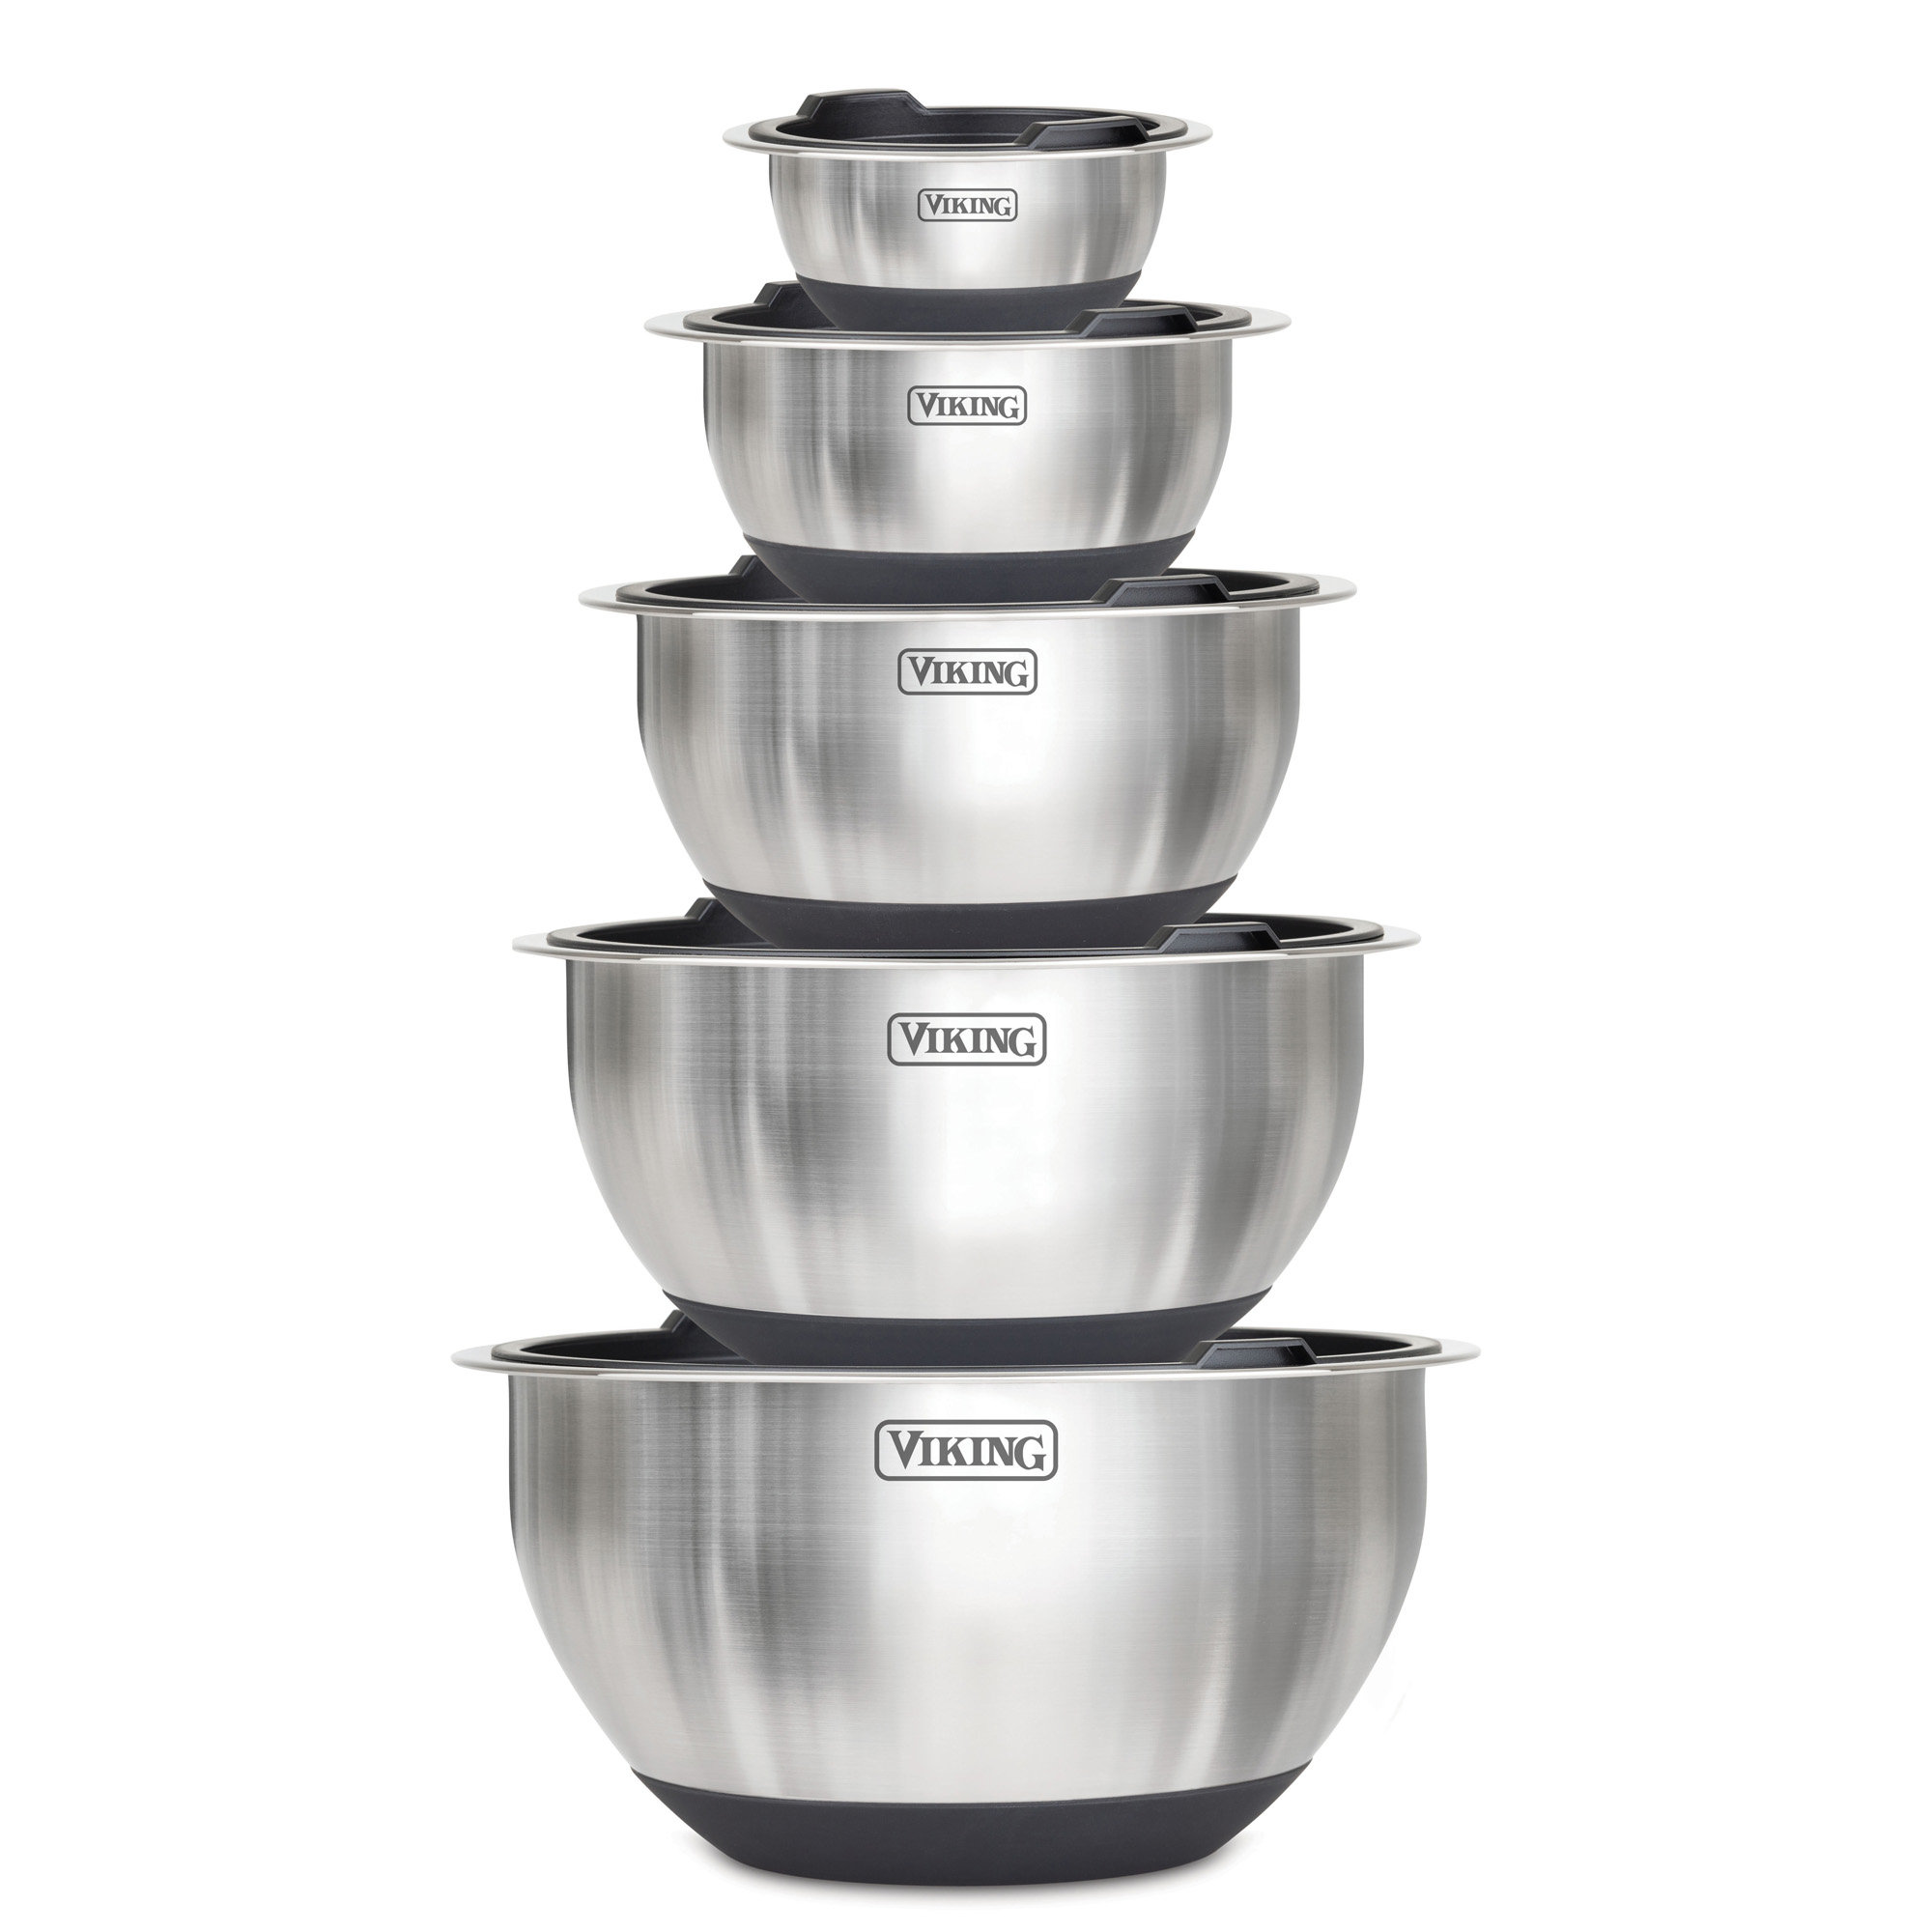 Joseph Joseph Nest 9-Piece Food Preparation Set with Nesting Mixing Bowls  and Measuring Cups 